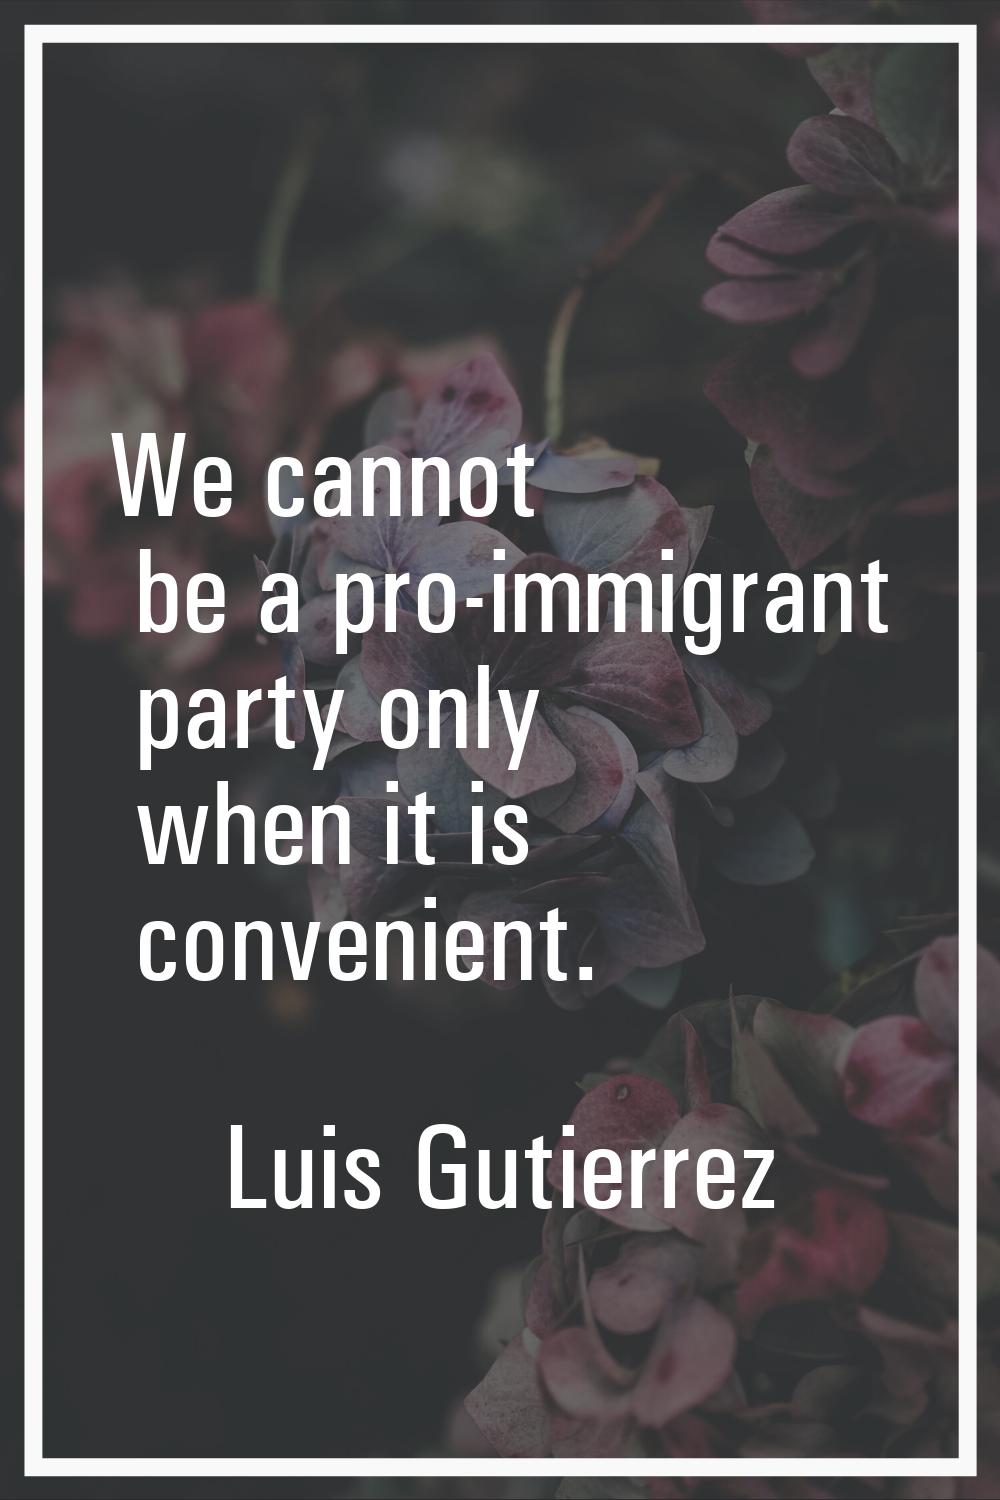 We cannot be a pro-immigrant party only when it is convenient.